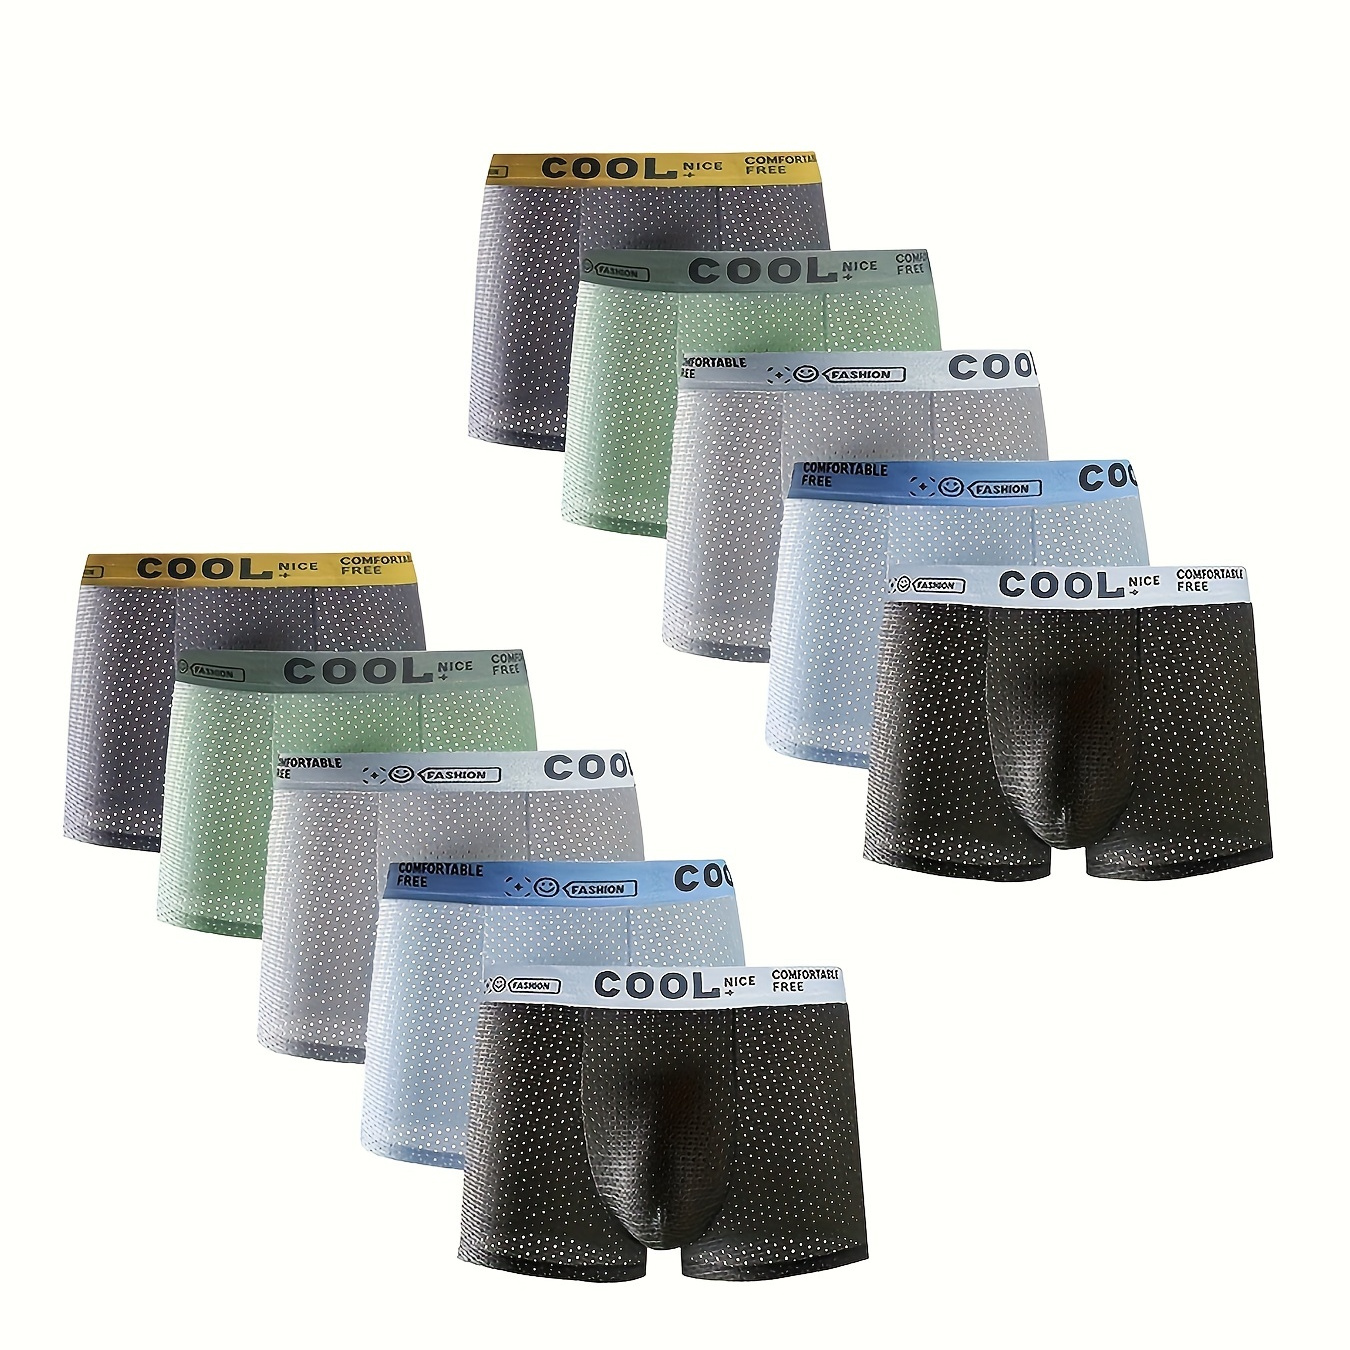 

10pcs Men's Mesh Summer Boxer Briefs, Sweat-absorbing Breathable Comfy Boxer Trunks, Elastic Athletic Shorts, Men's Casual & Durable Underwear Perfect For Sports & Home Wear